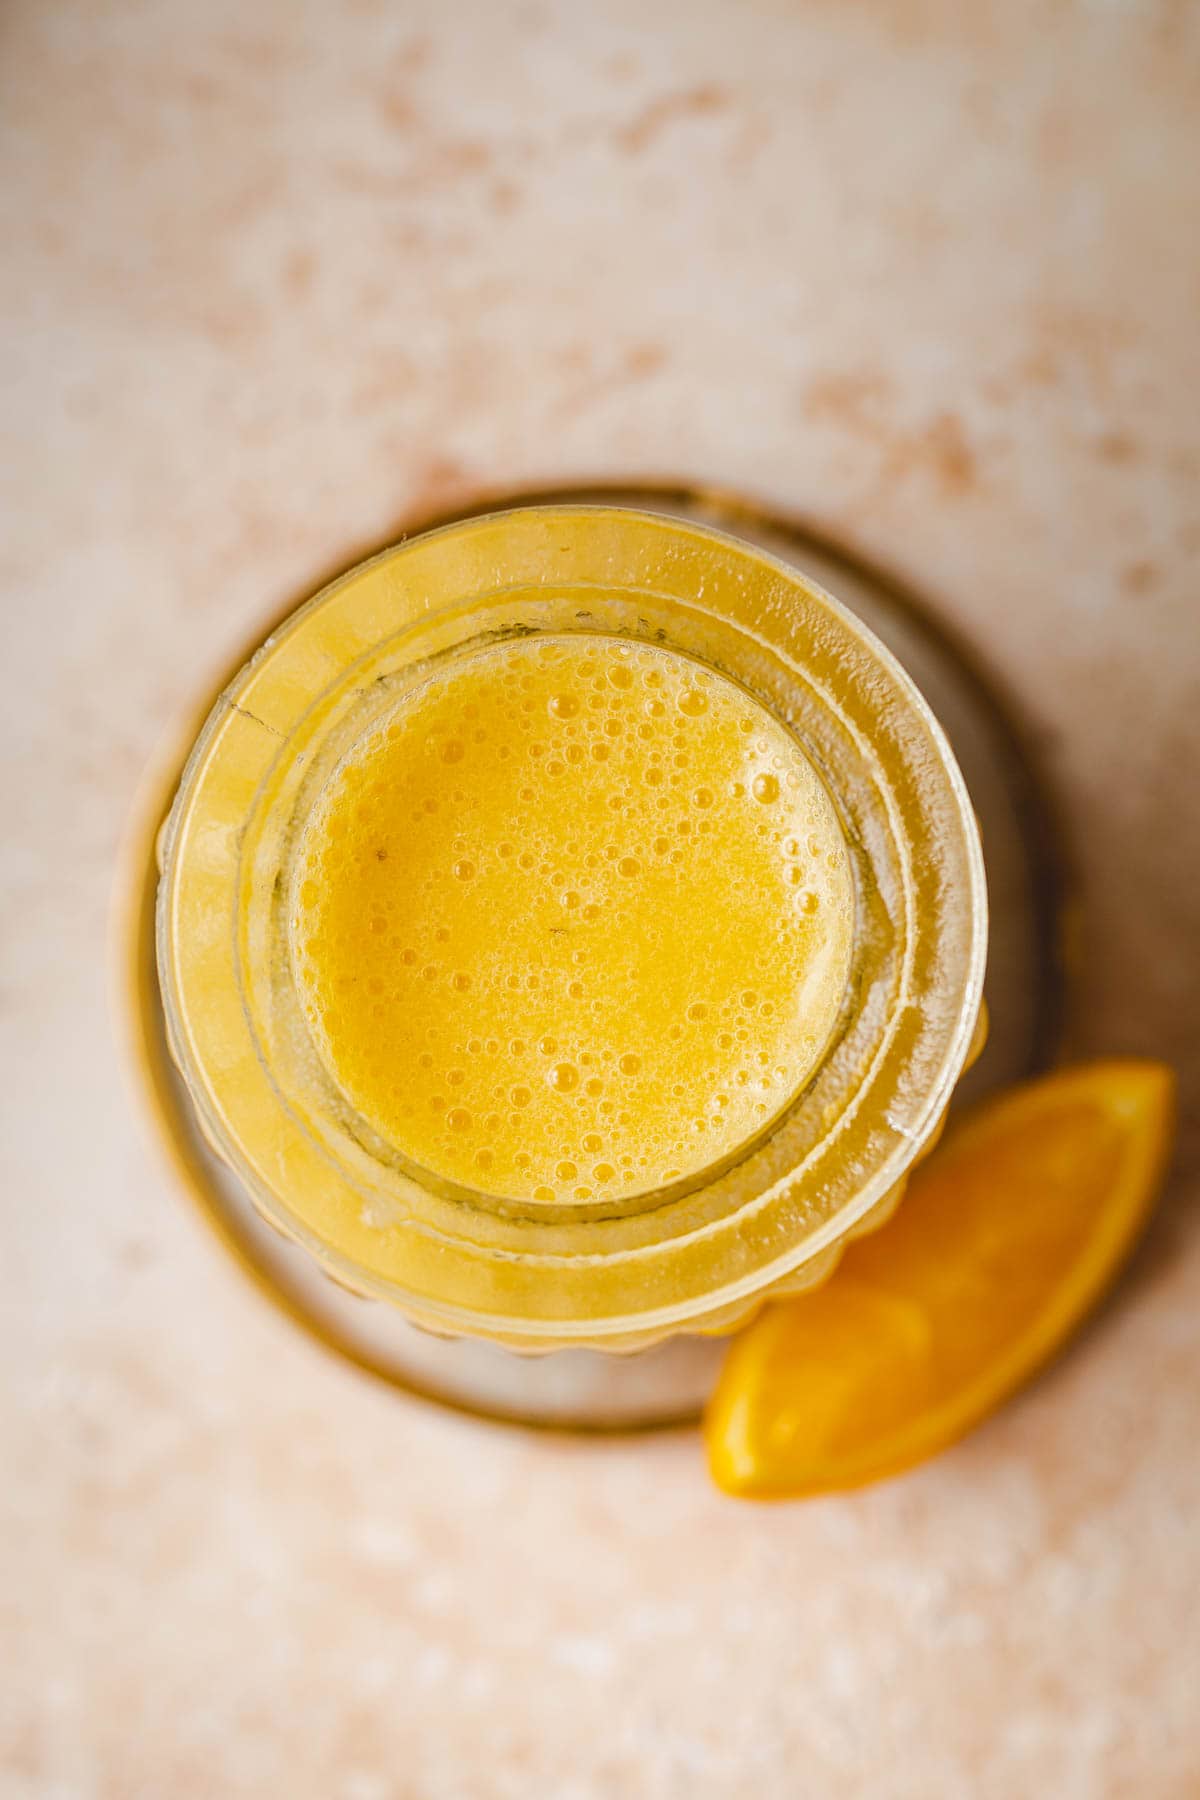 A close-up overhead image of a yellow smoothie in a glass.